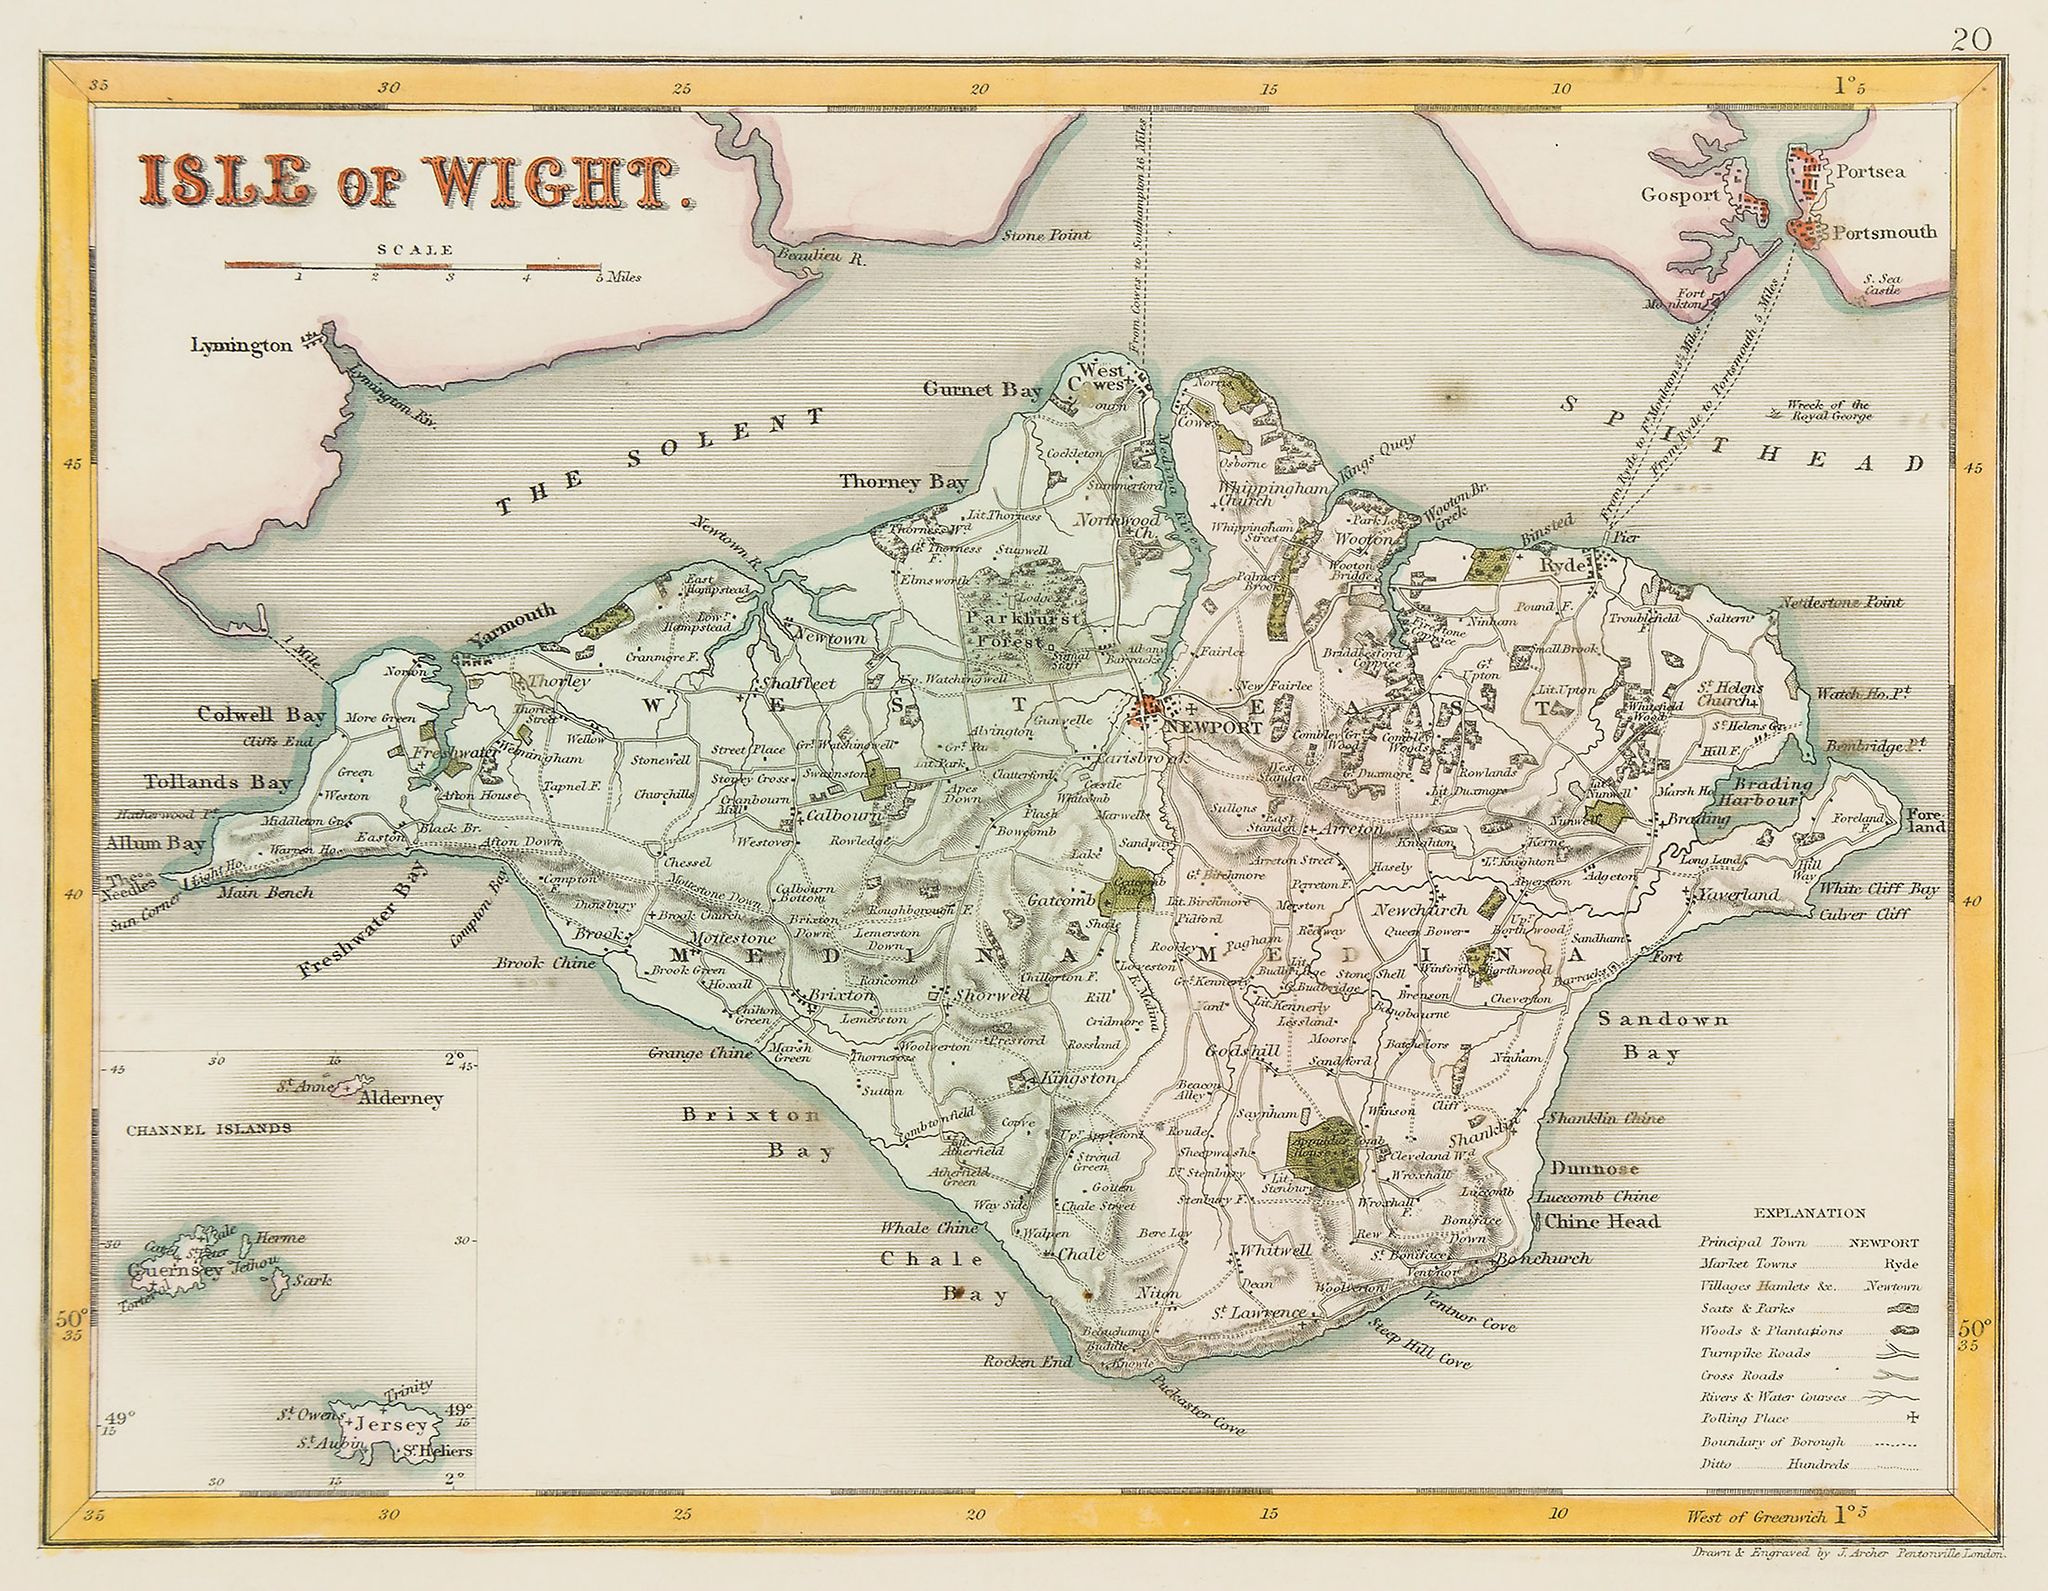 Hampshire.- [Lea (Philip)] - A Map of the Isle of Wight, Portsea, Halinge, also the Islands of - Image 2 of 2